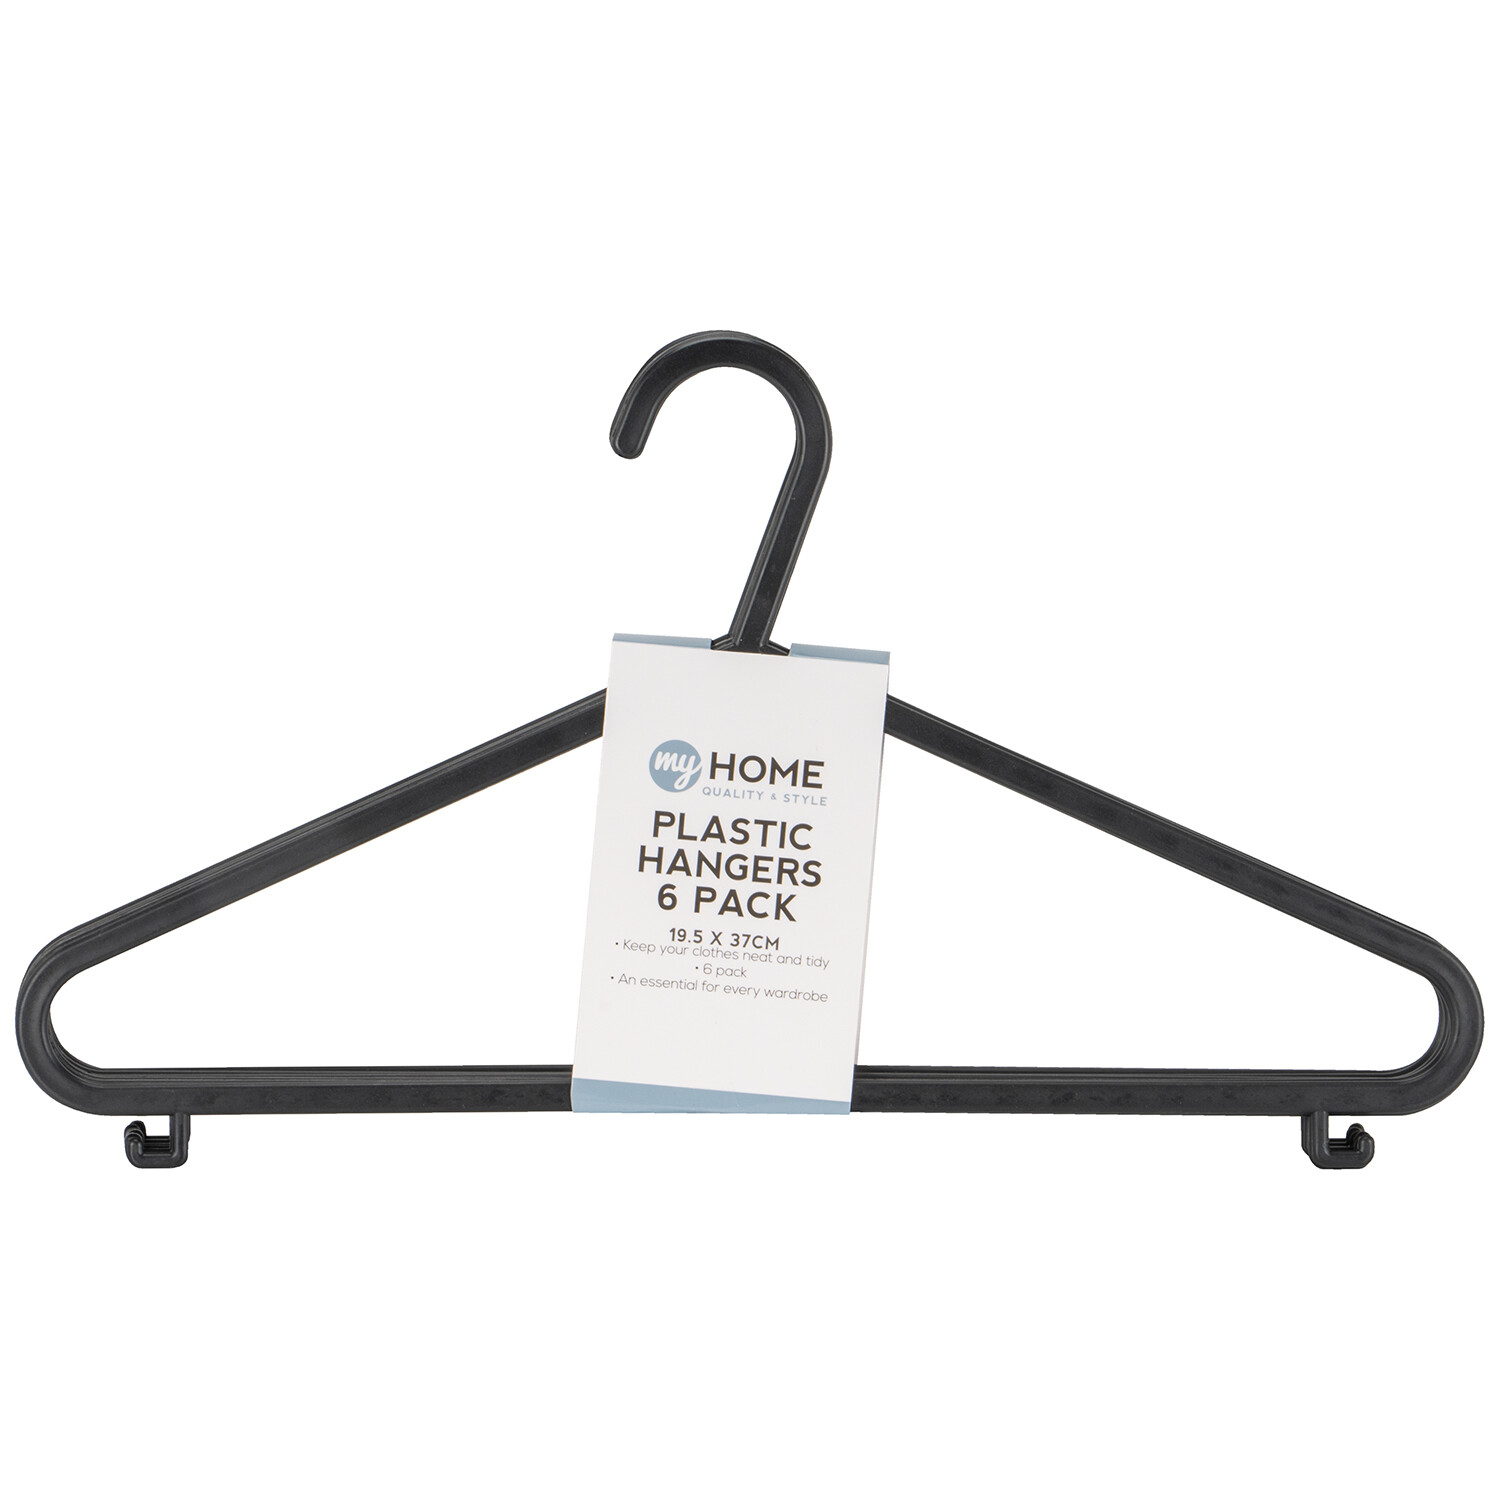 My Home Plastic Hangers 6 Pack Image 1